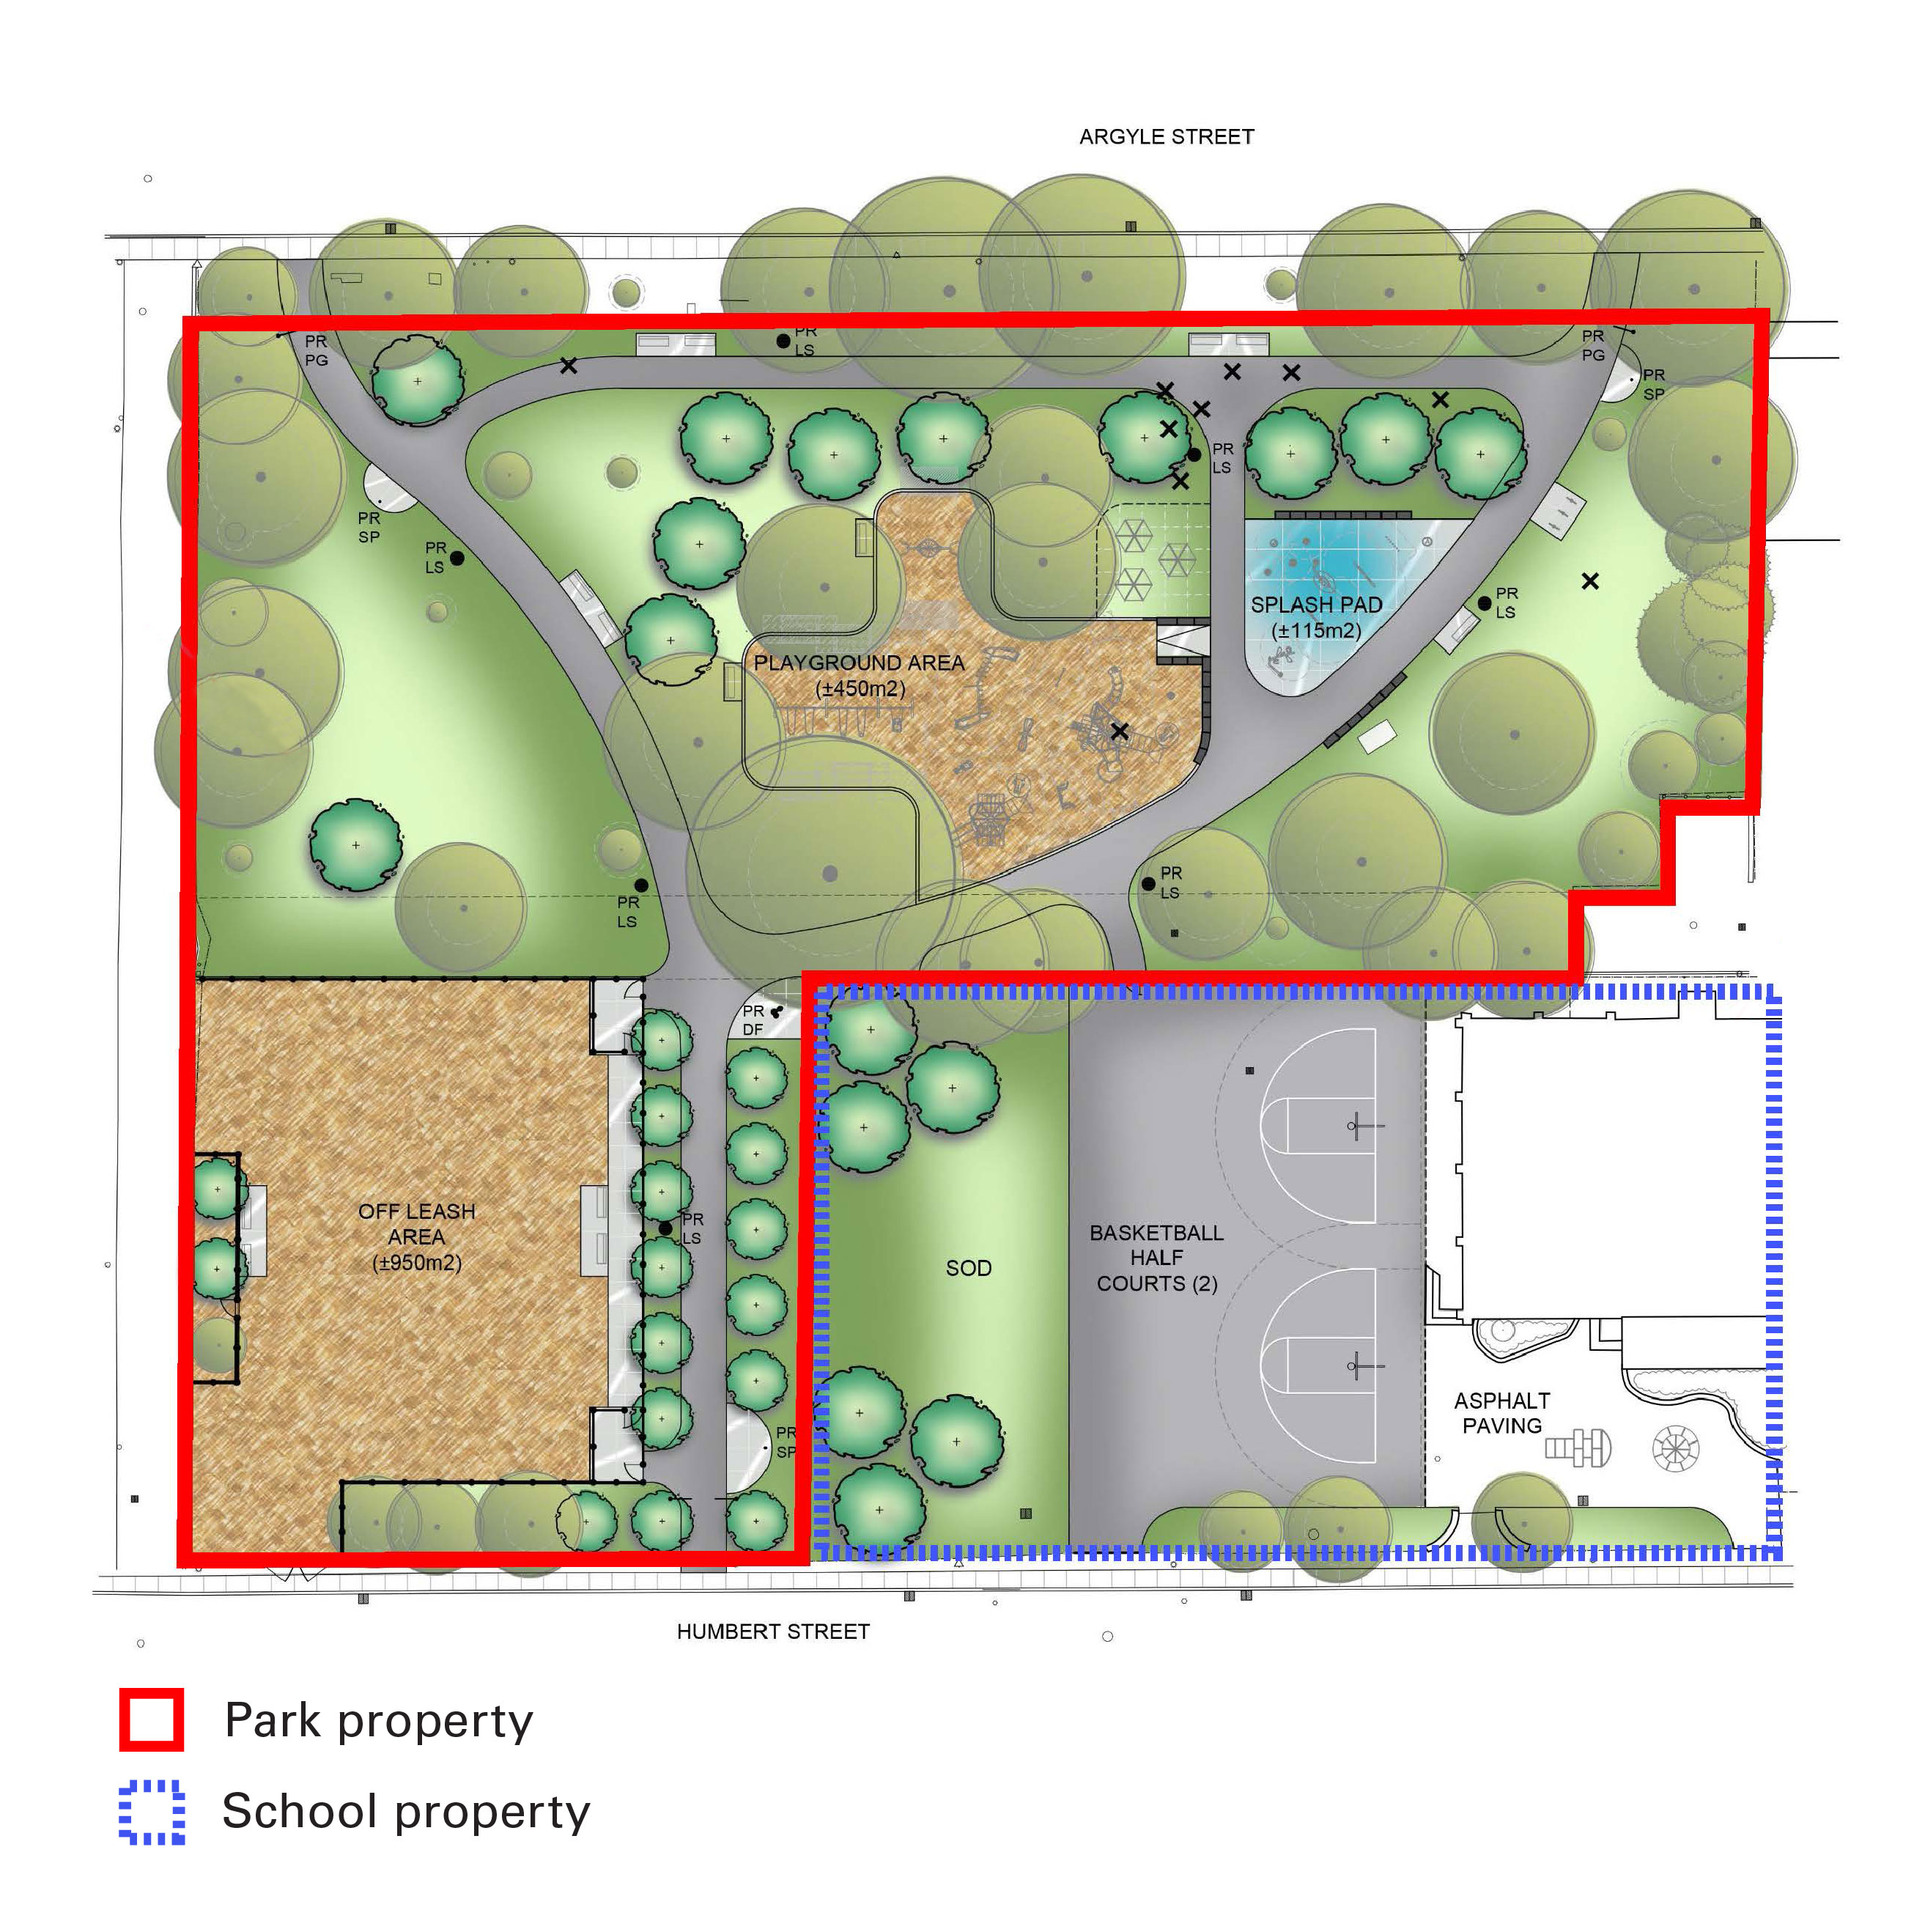 Plan showing the final design and property boundaries for the park and adjacent school grounds.